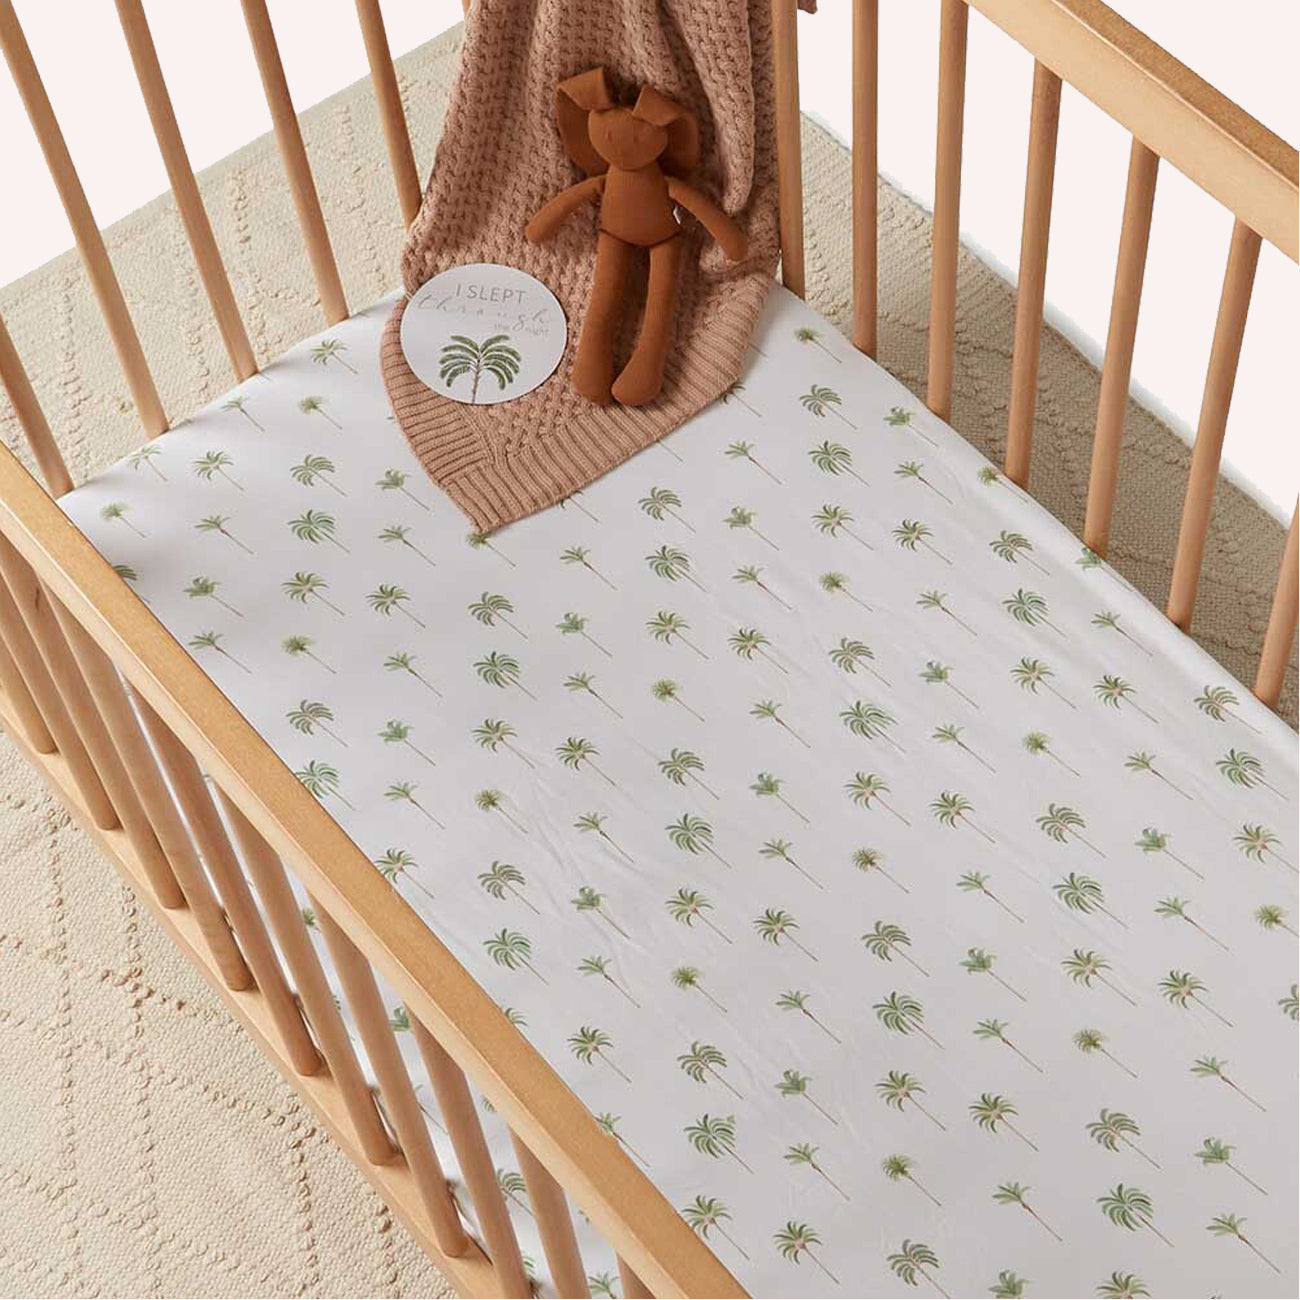 Fitted Cot Sheet - Green Palm